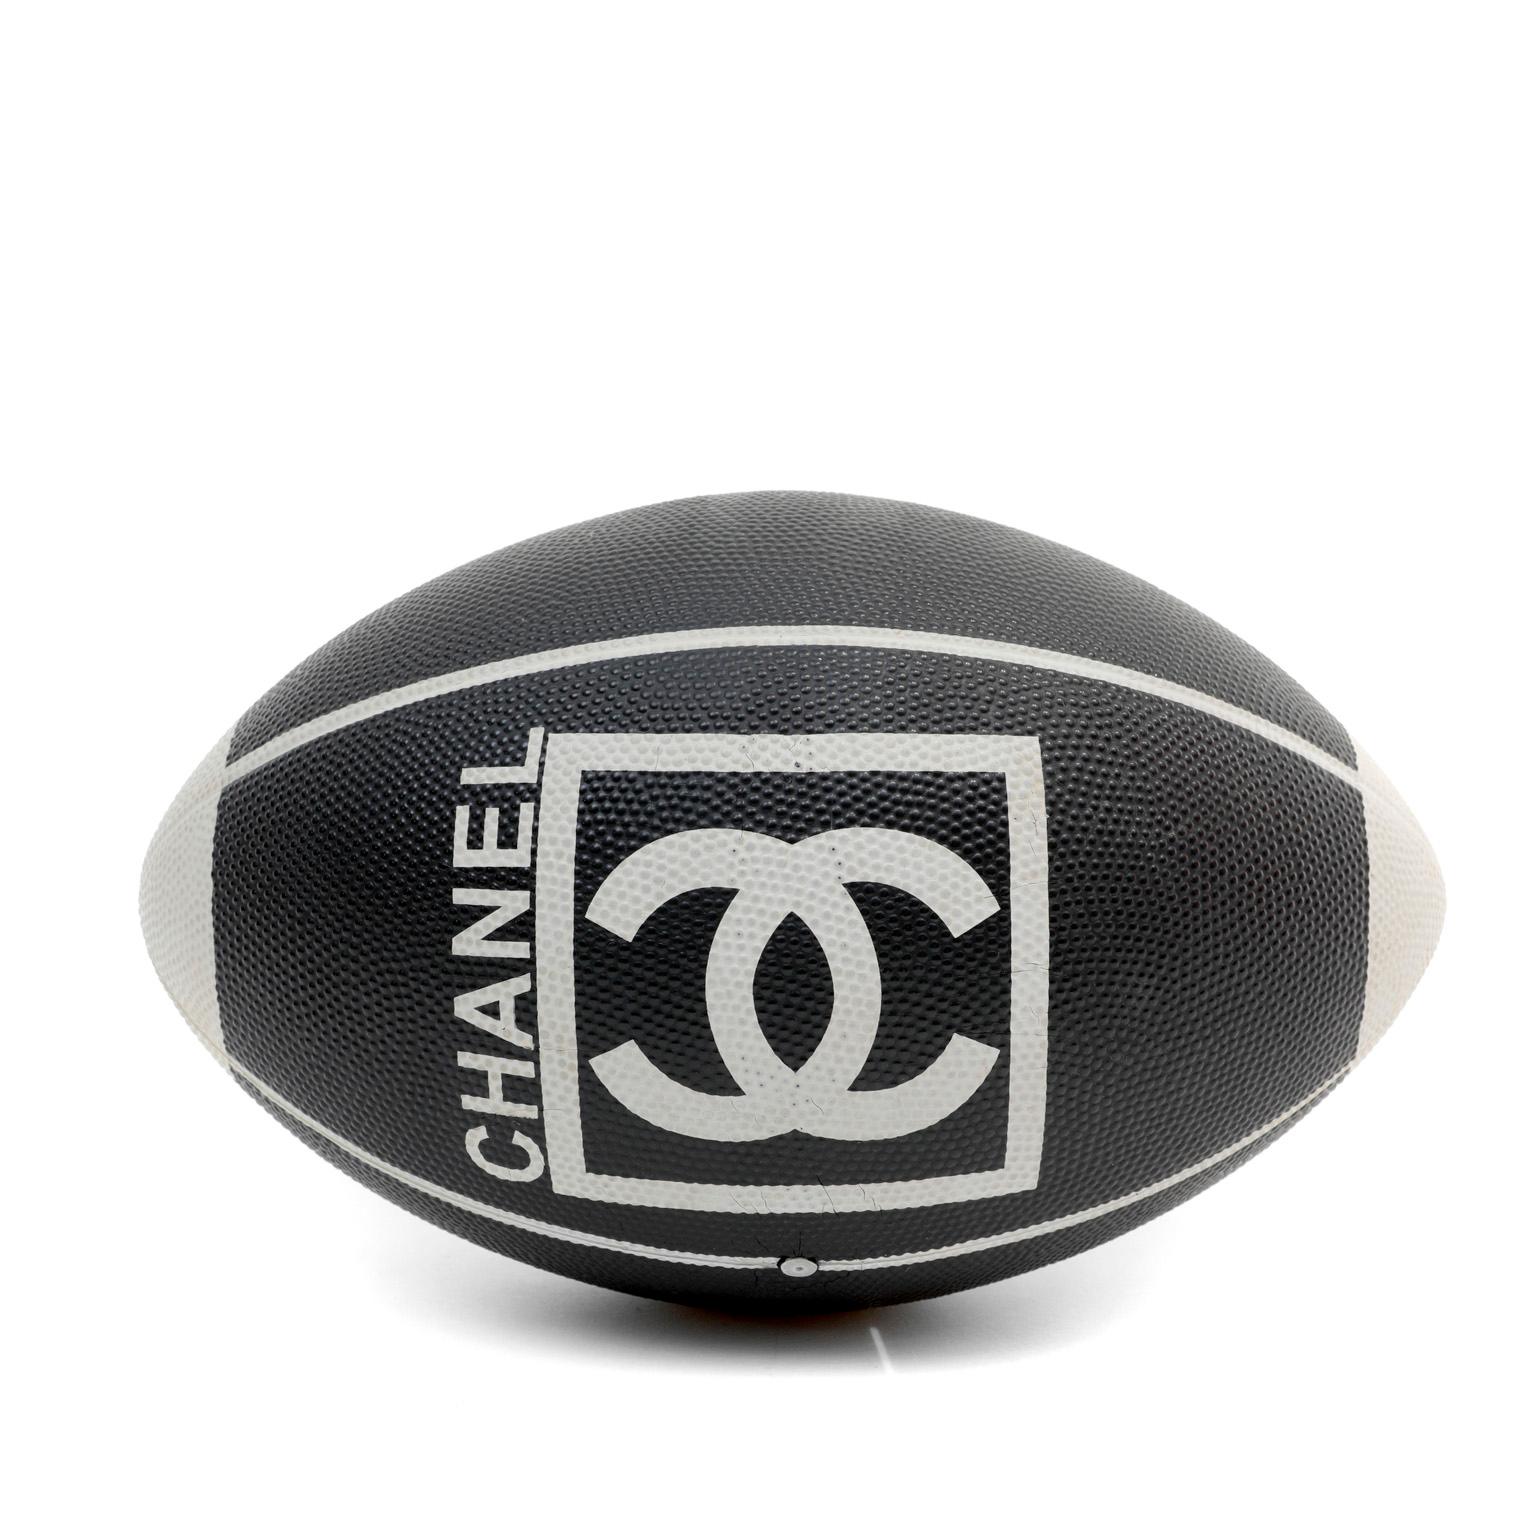 Chanel Black and White Game Series Rugby Football In New Condition For Sale In Palm Beach, FL